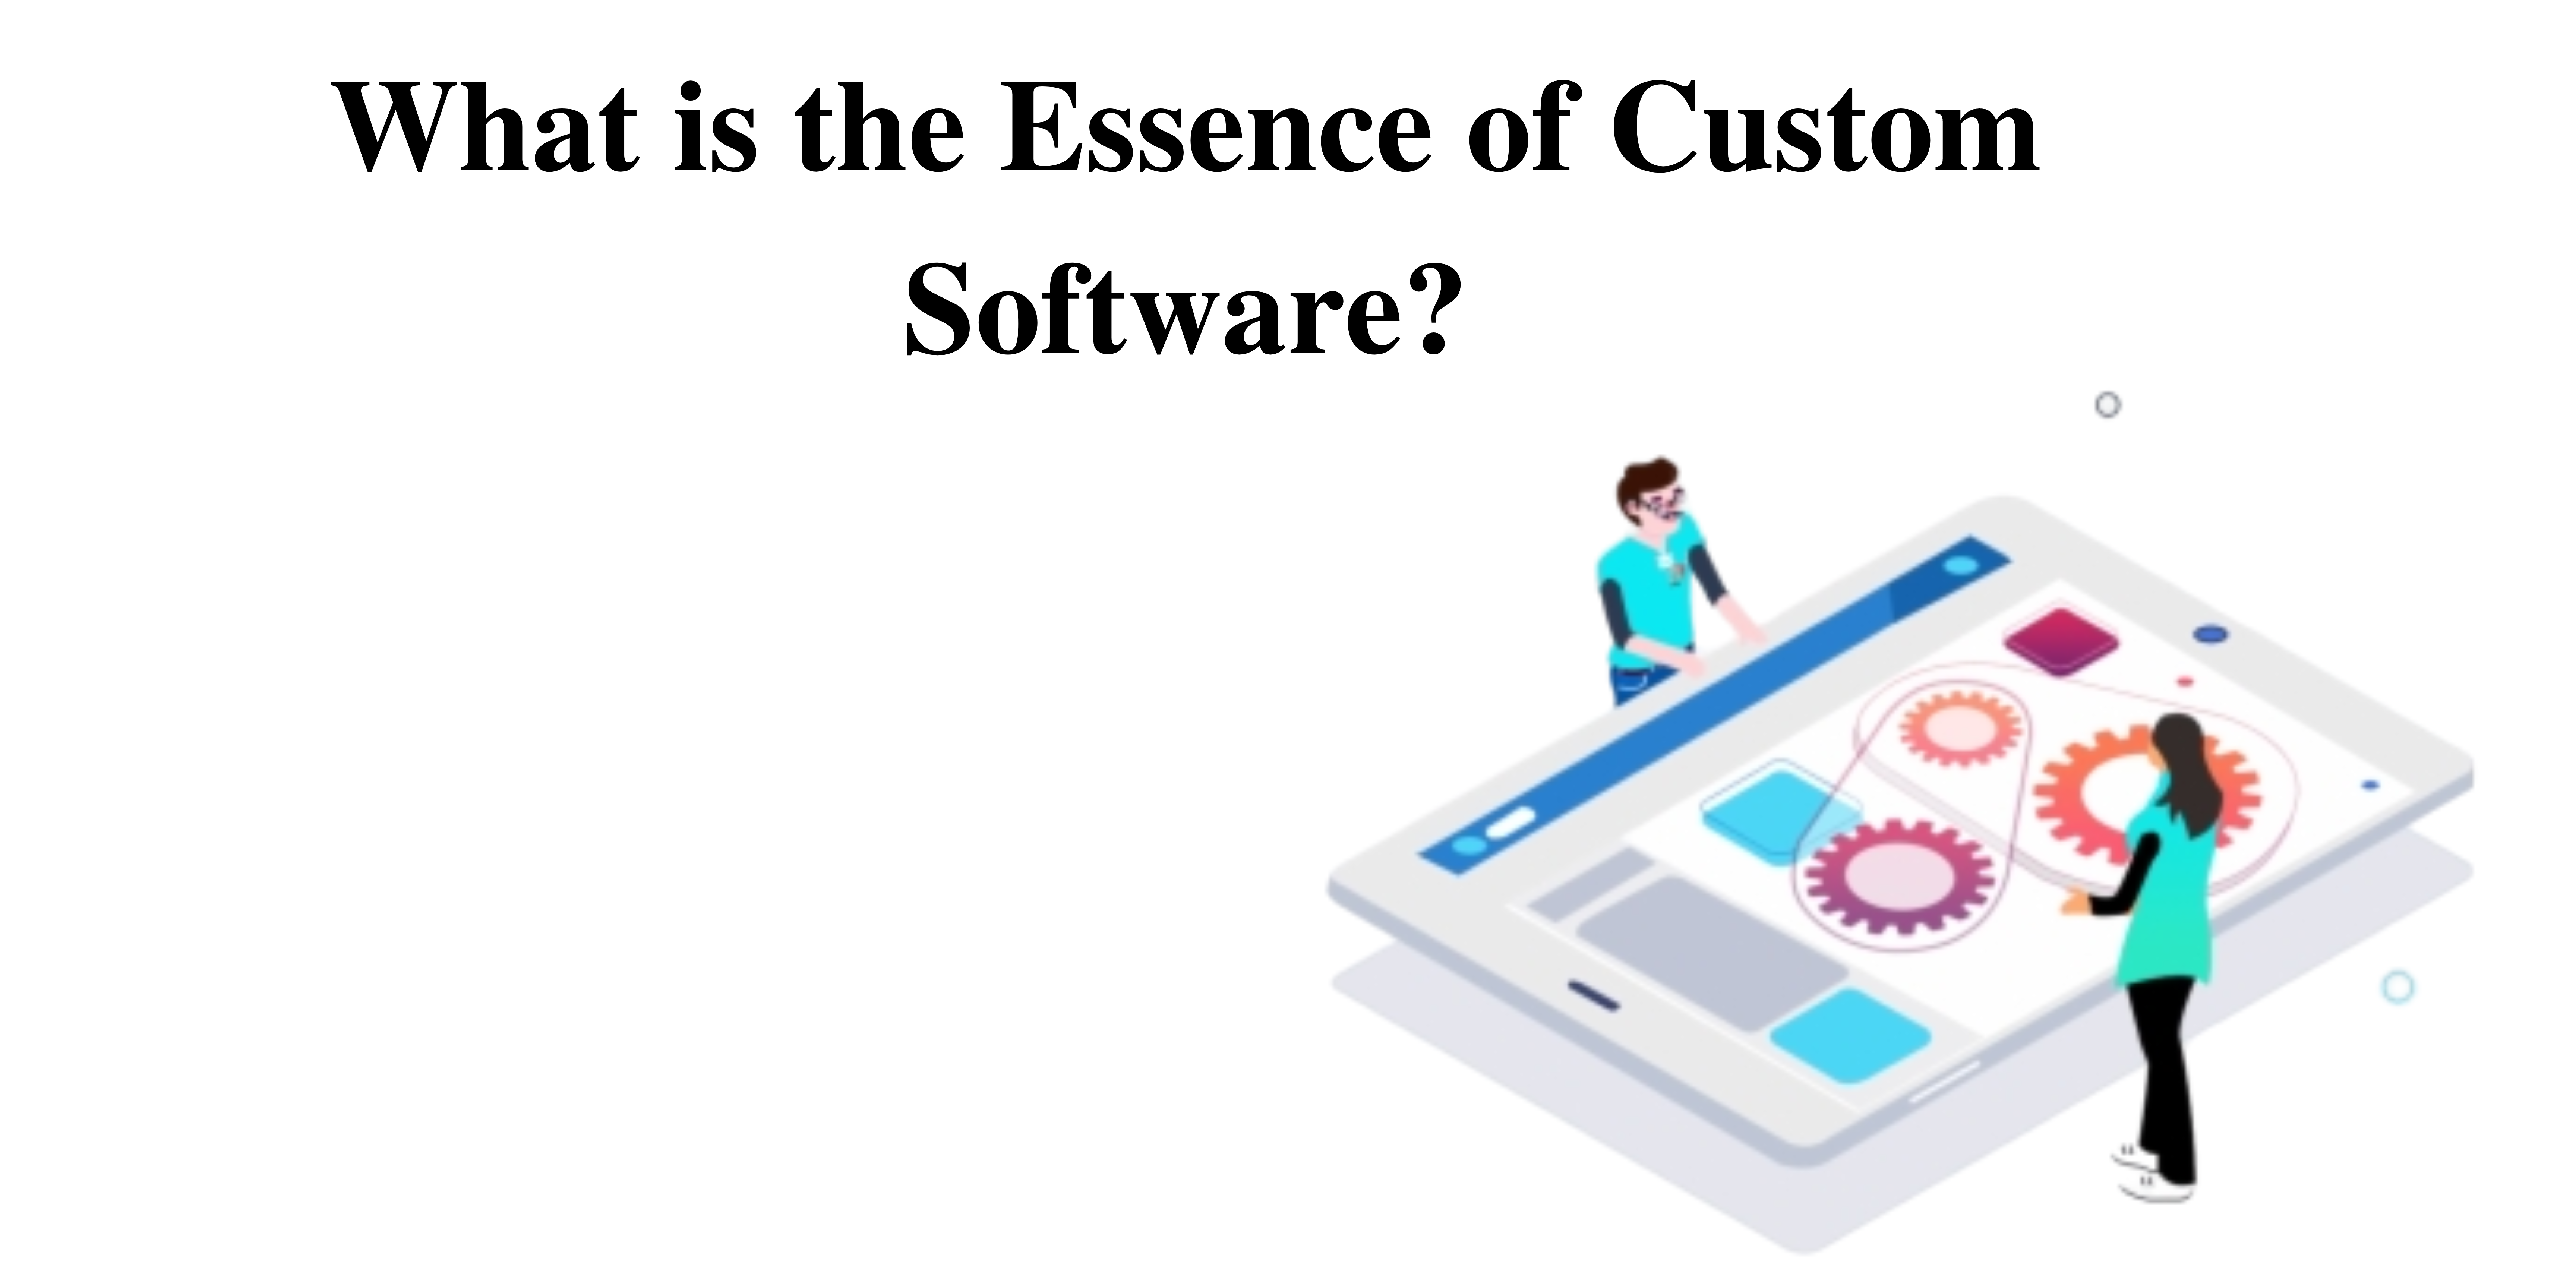 What is the Essence of Custom Software?